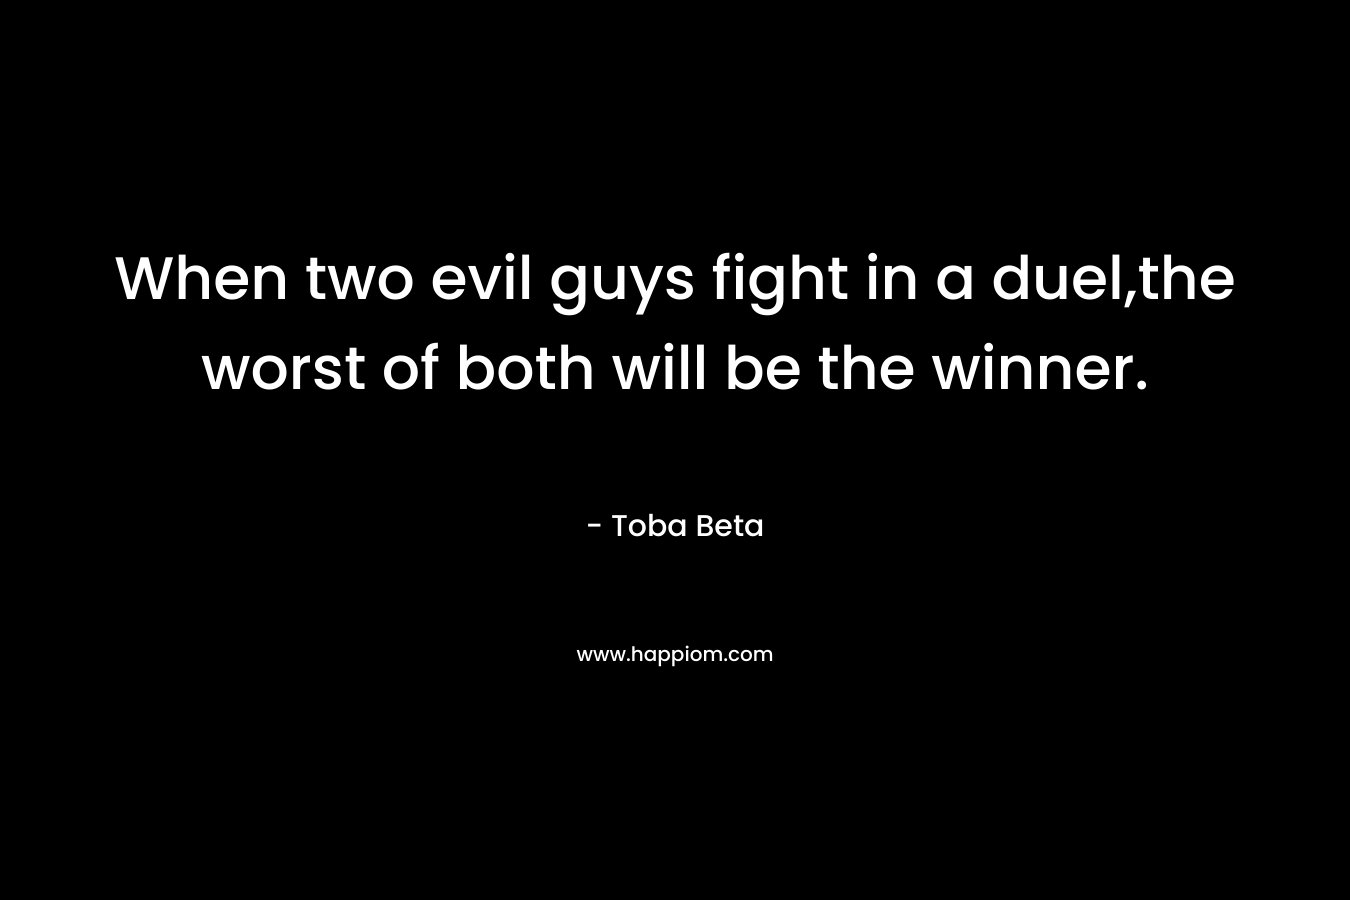 When two evil guys fight in a duel,the worst of both will be the winner. – Toba Beta